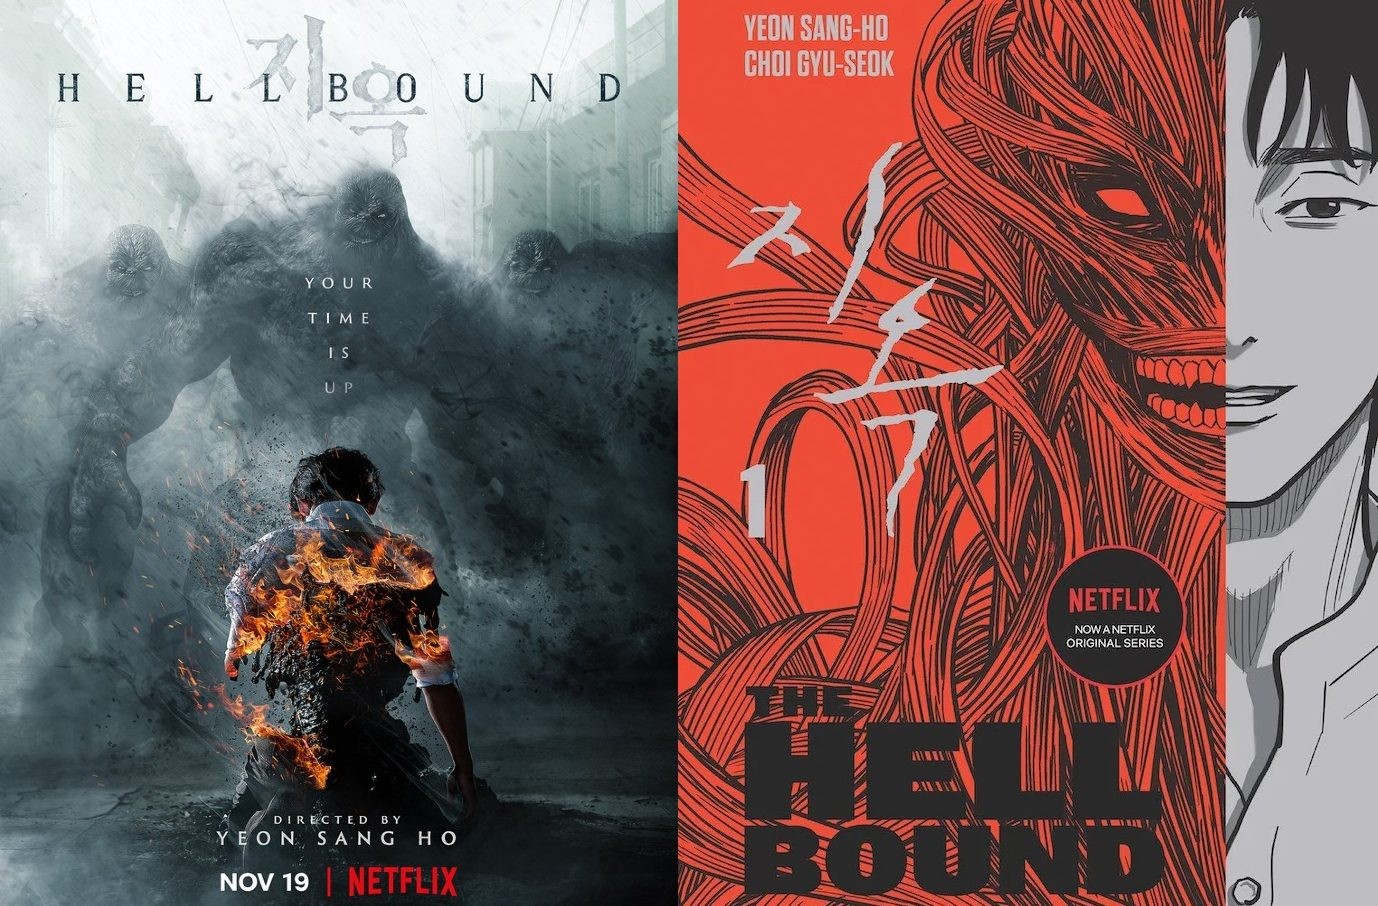 Hellbound is a live-action adaptation of the webtoon